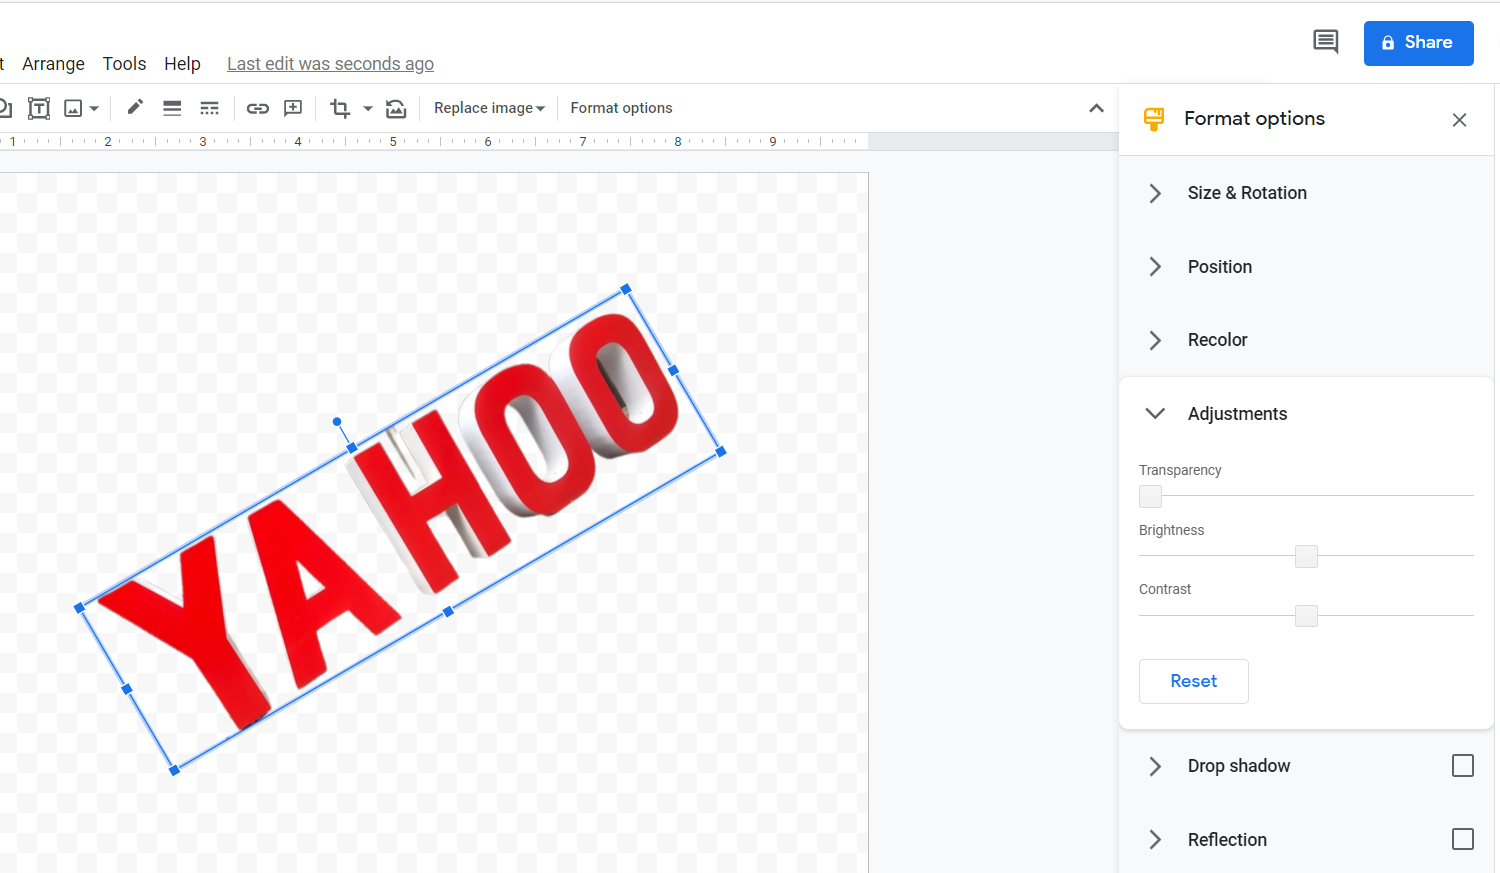 Adjustment options in Google Drawings